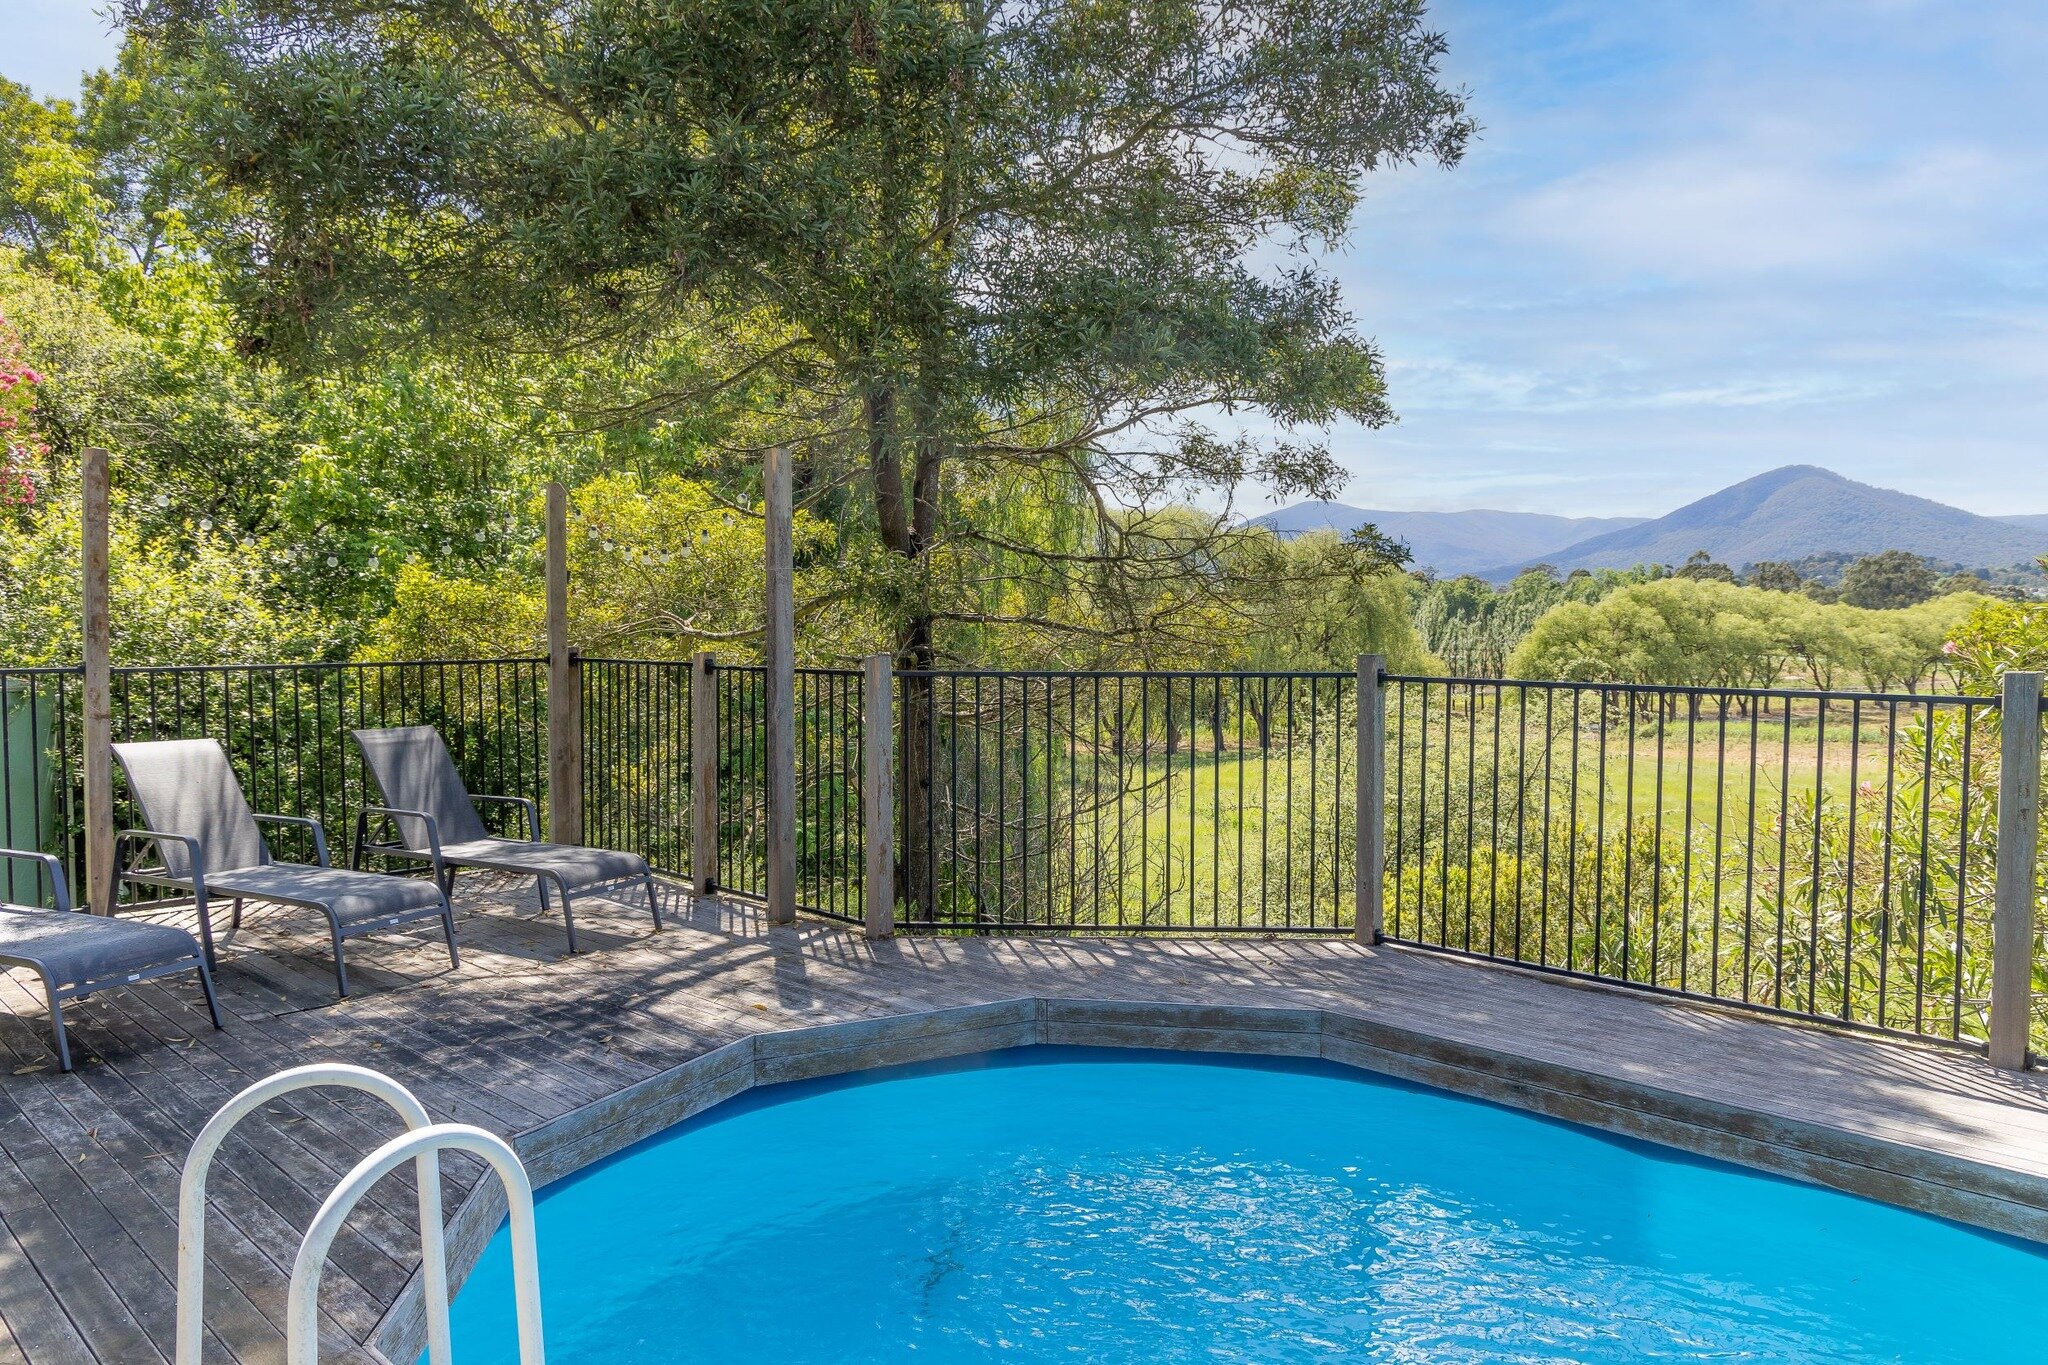 Swimming with a view! Enjoy your summer by the pool at Willowbank 💦